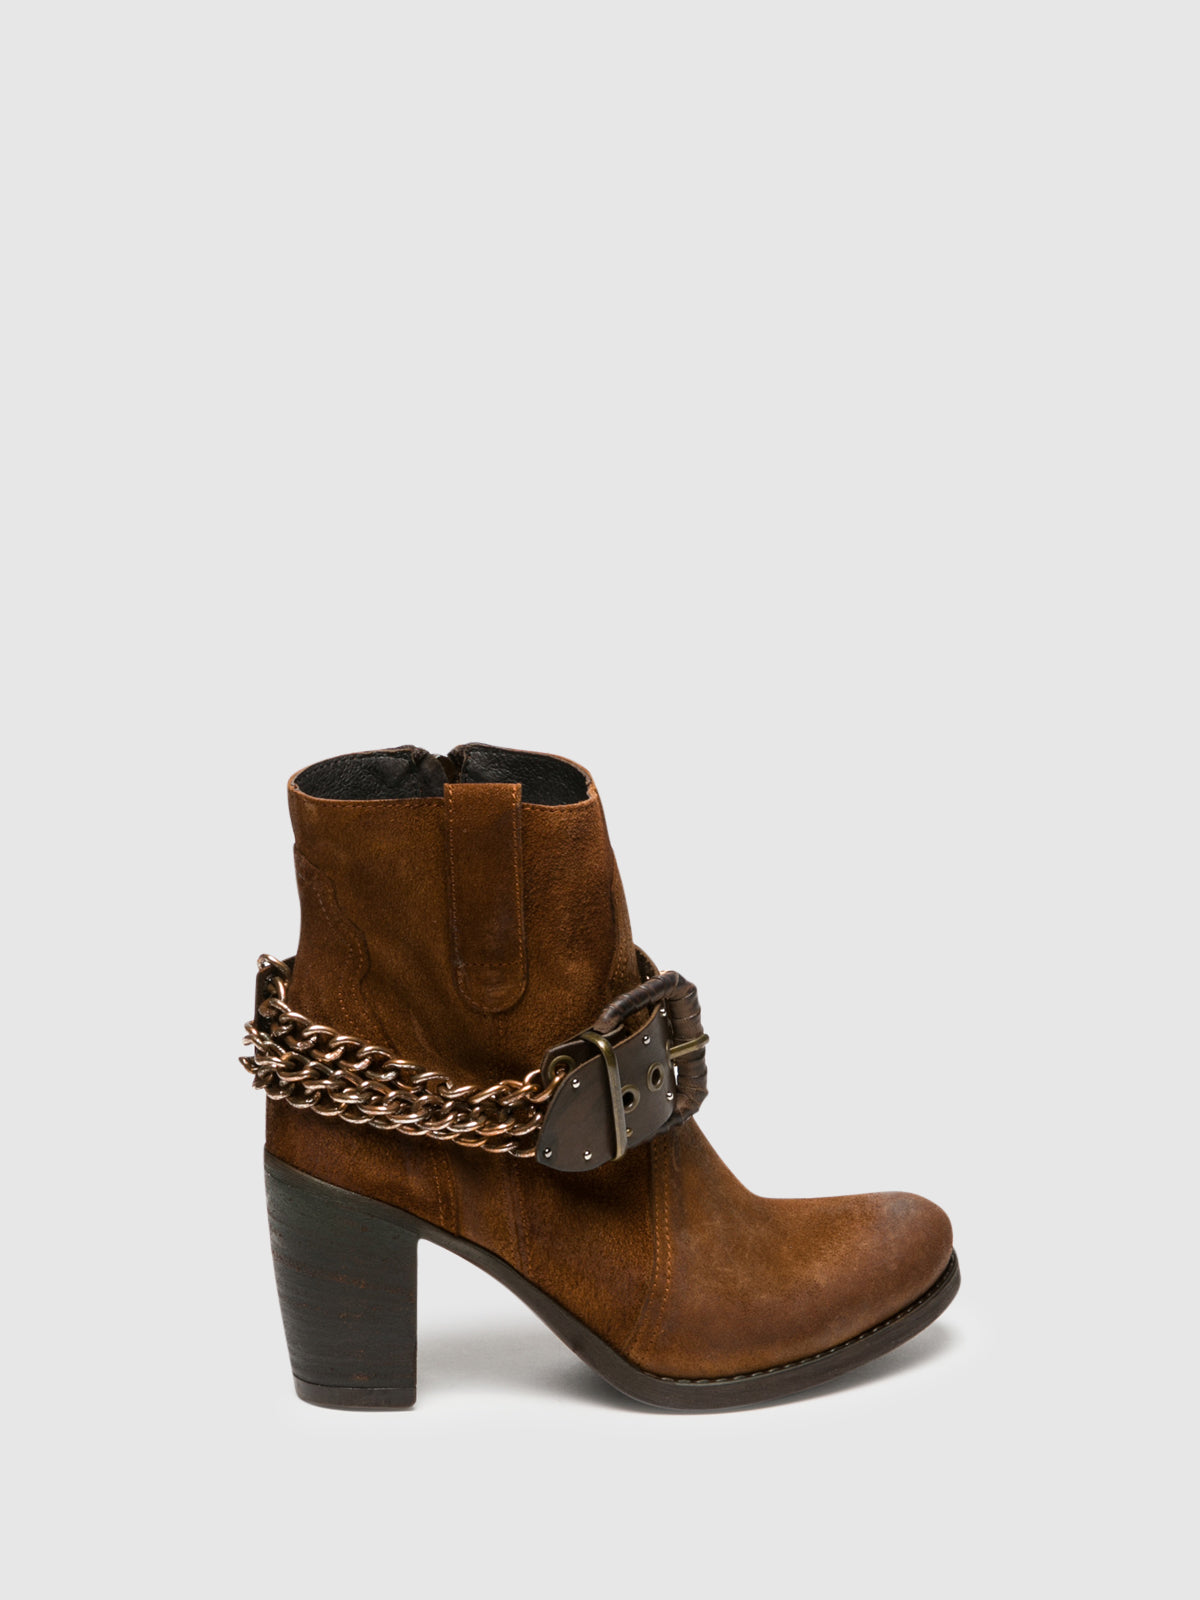 Foreva Peru Buckle Ankle Boots